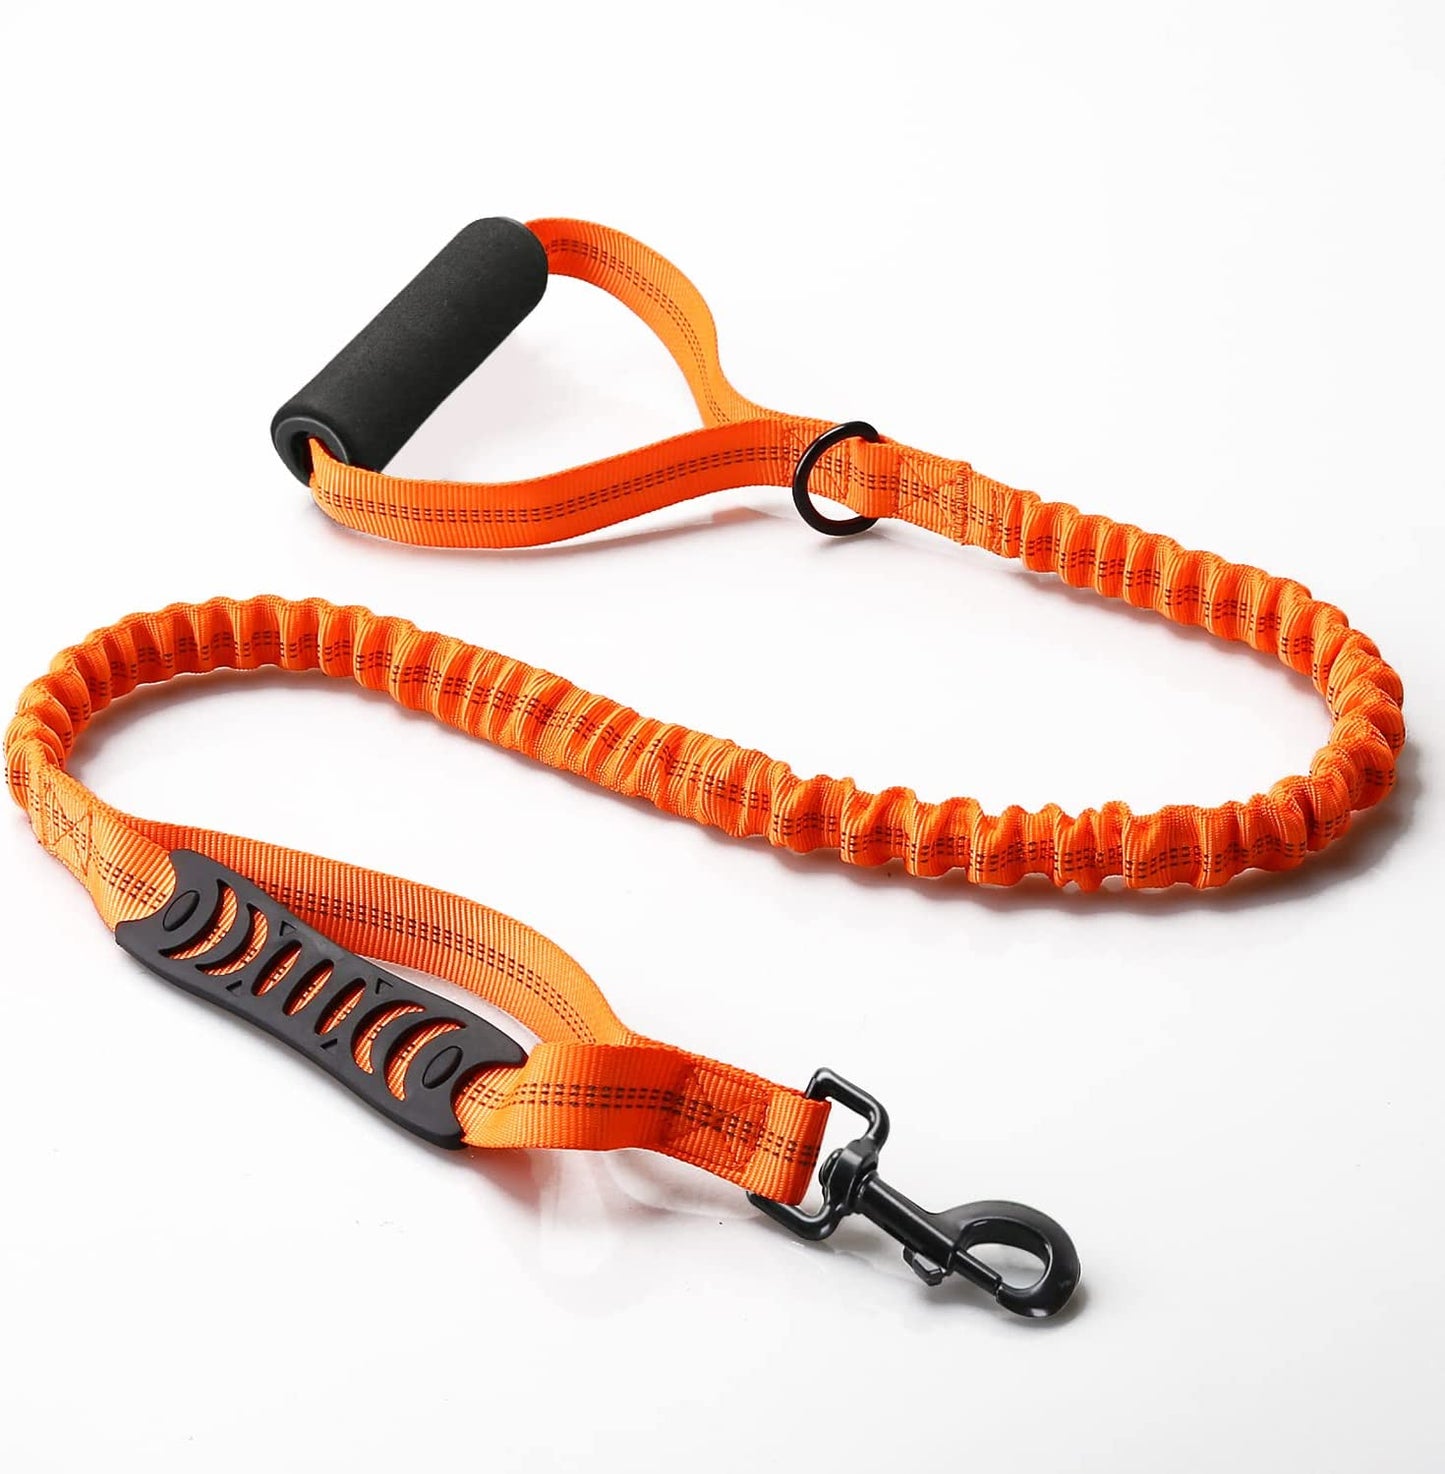 Heavy Duty Reflective Bungee Leash with Padded Handle